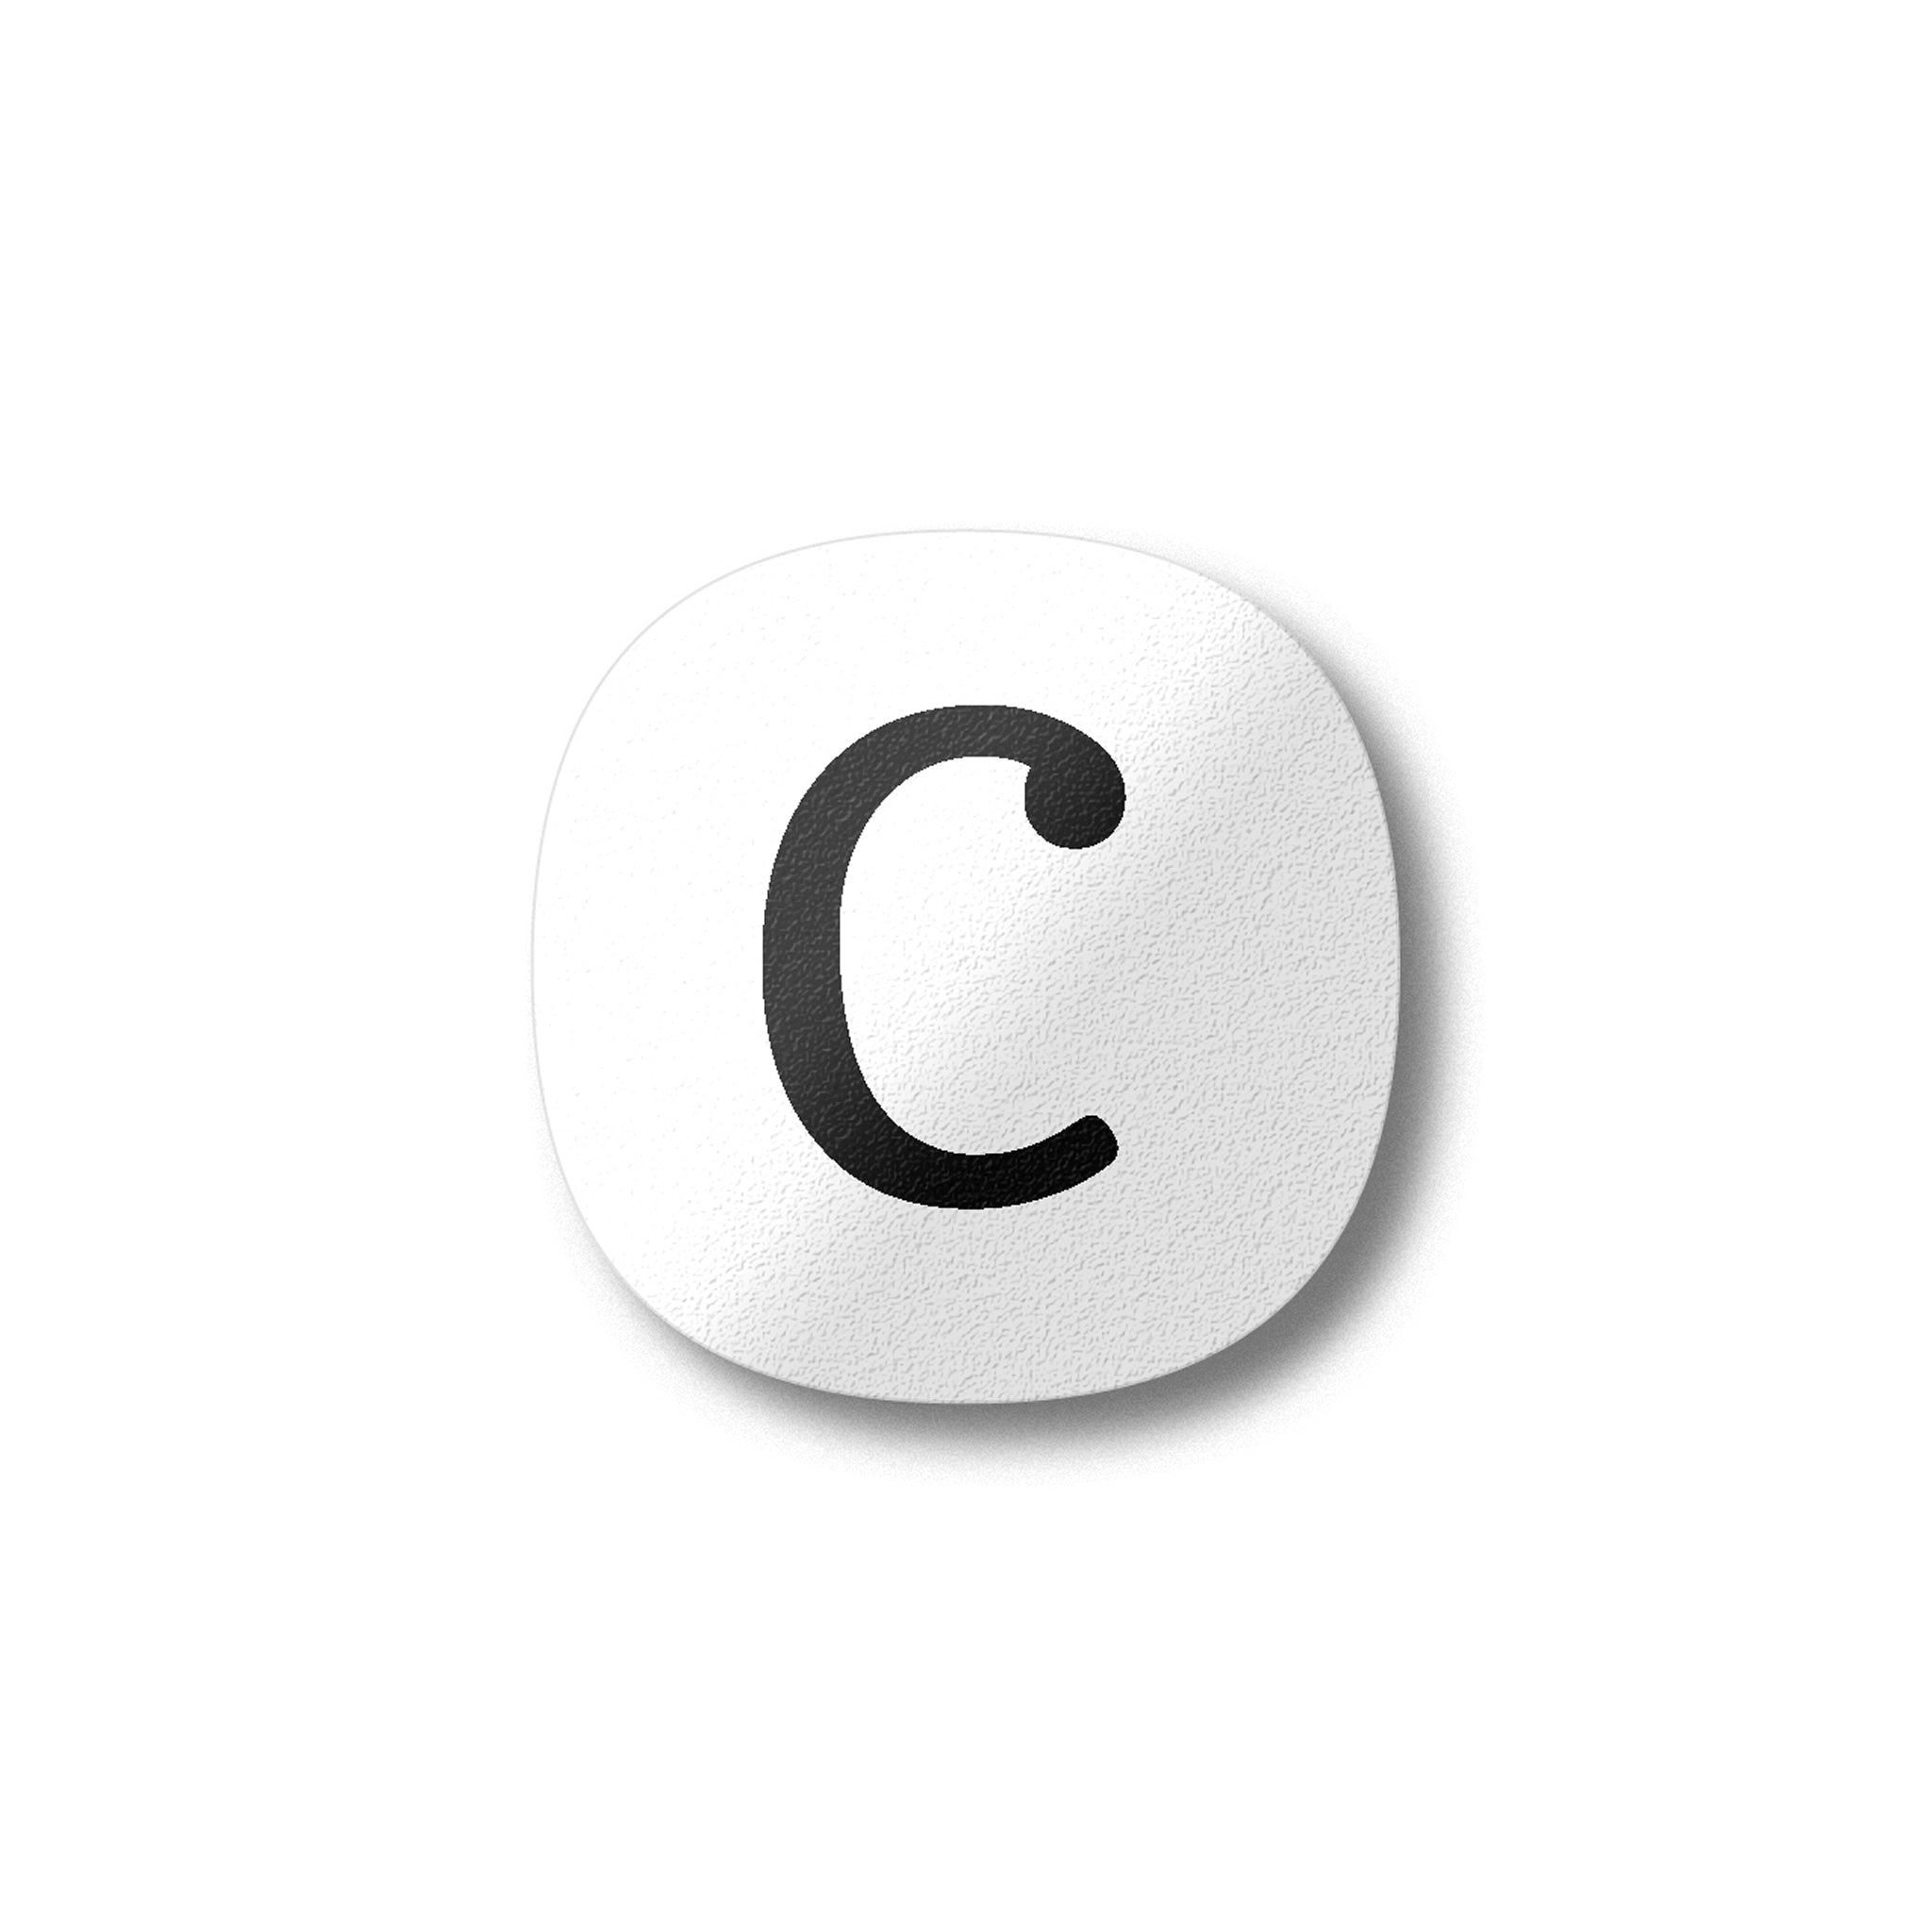 A white magnet with a black letter C plywood fridge magnet by Beyond the Fridge